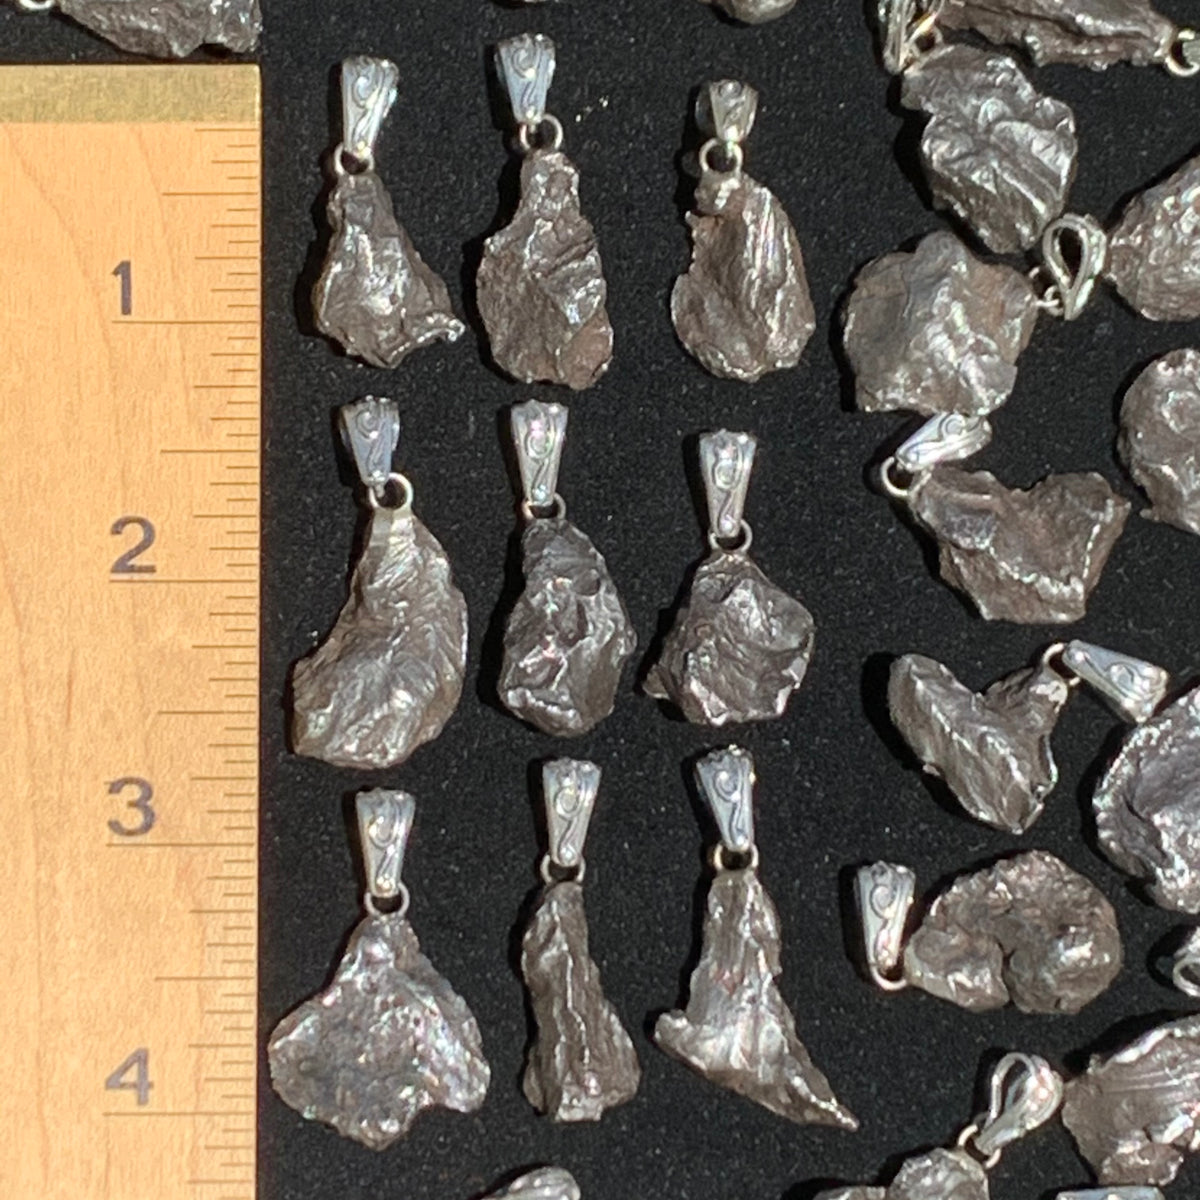 A group of Sikhote Aline meteorite pendants are set next to a ruler to show scale